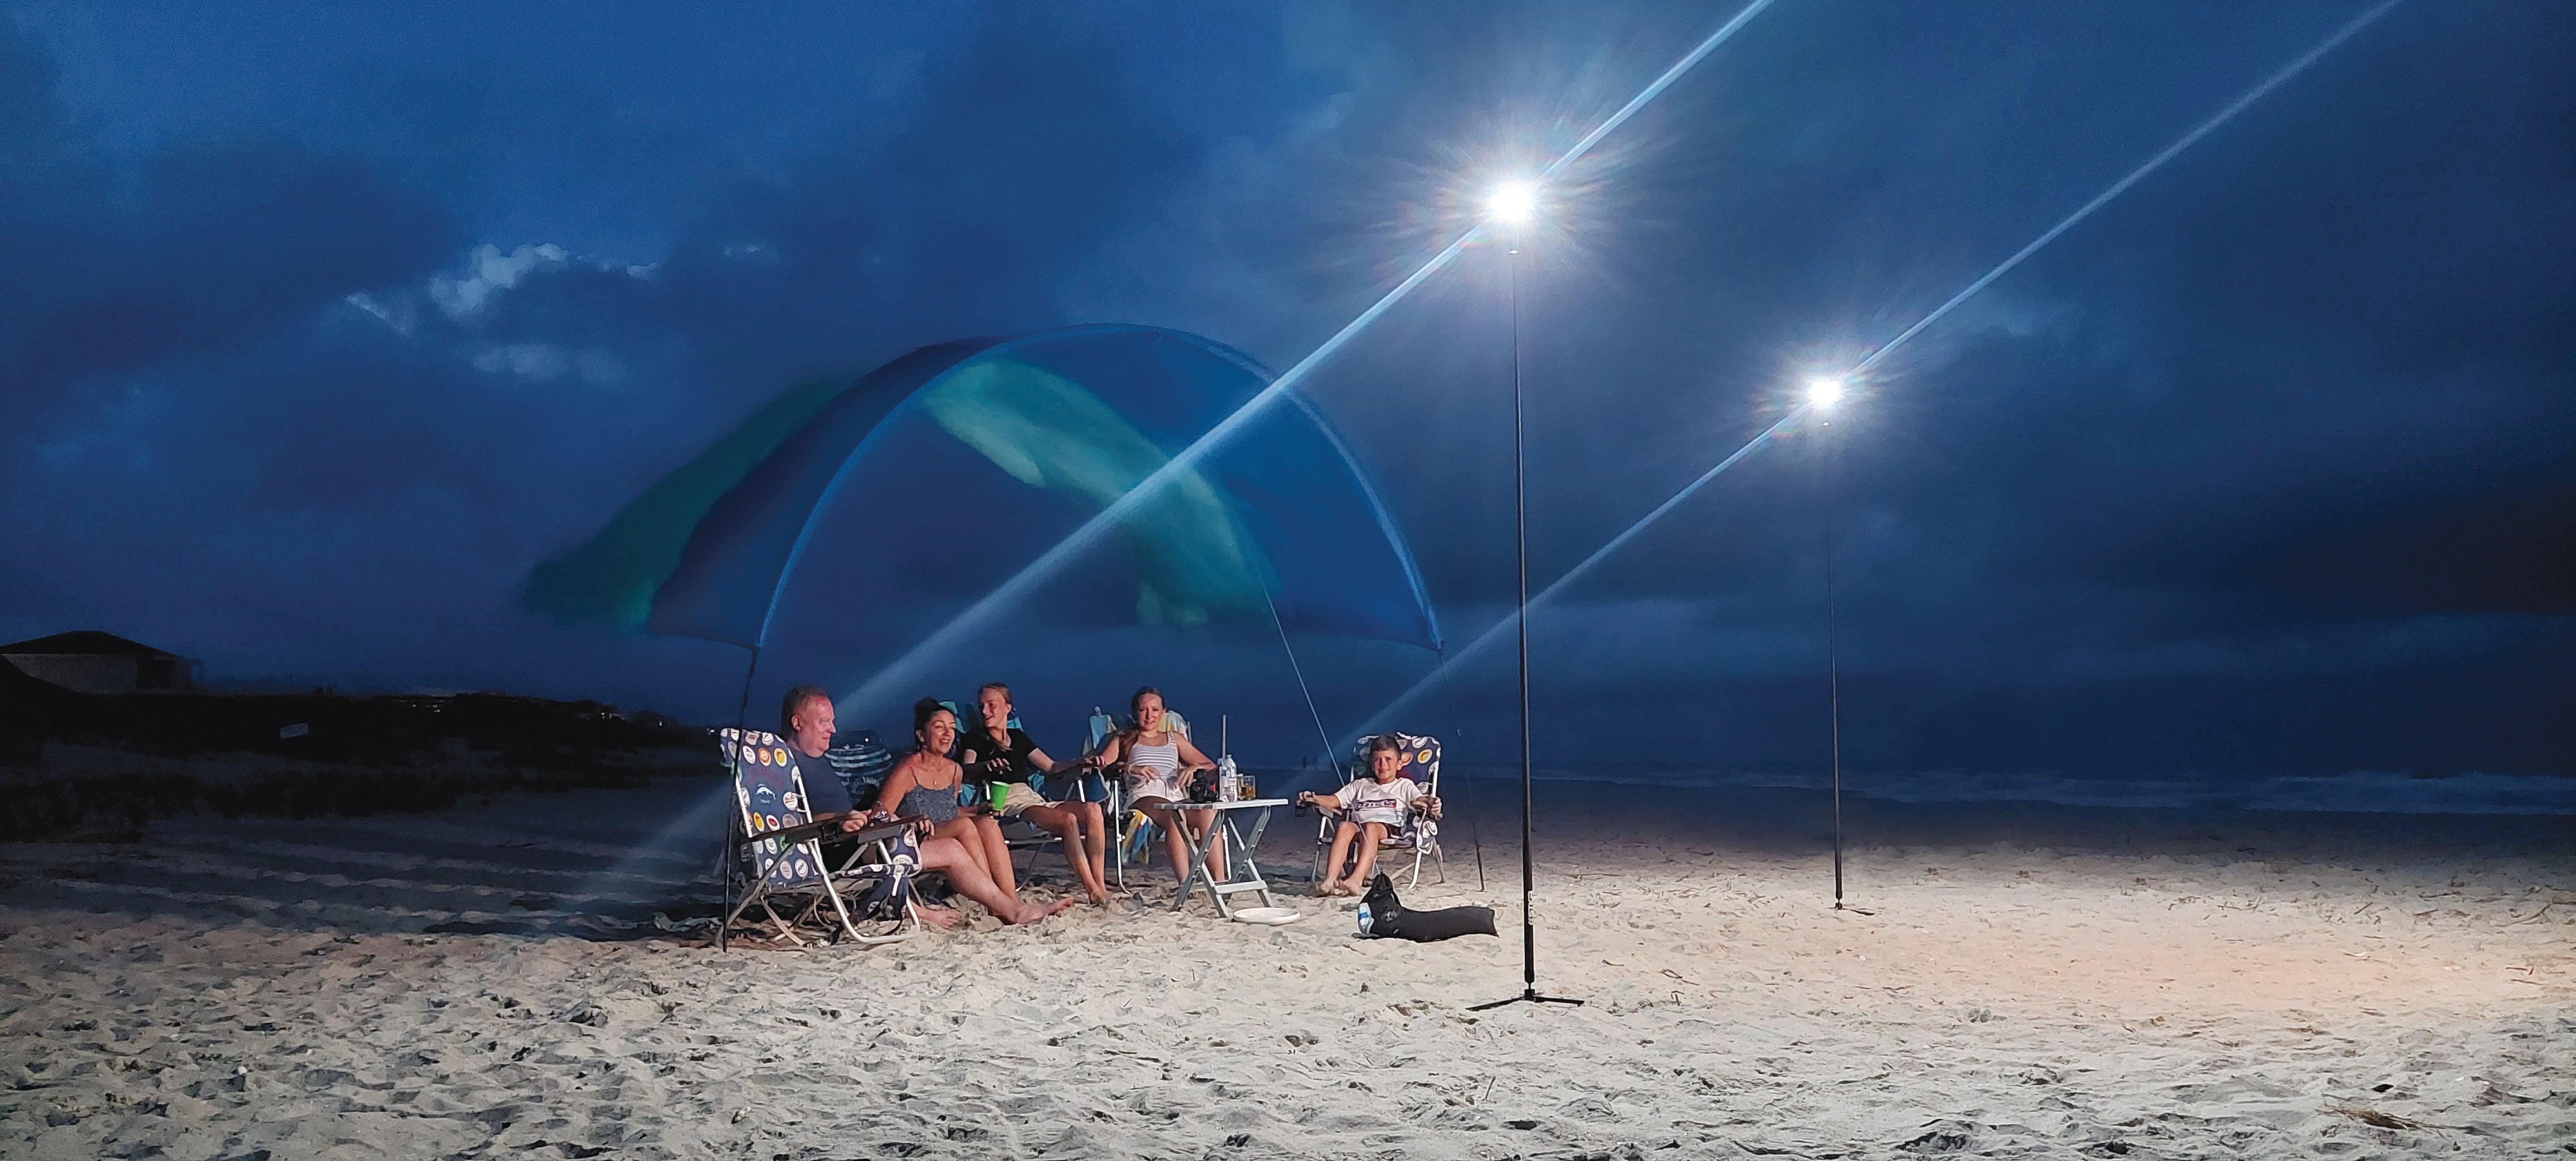 a family sitting on the beach at night illuminated by 2 FLi Telescoping lights by STKR